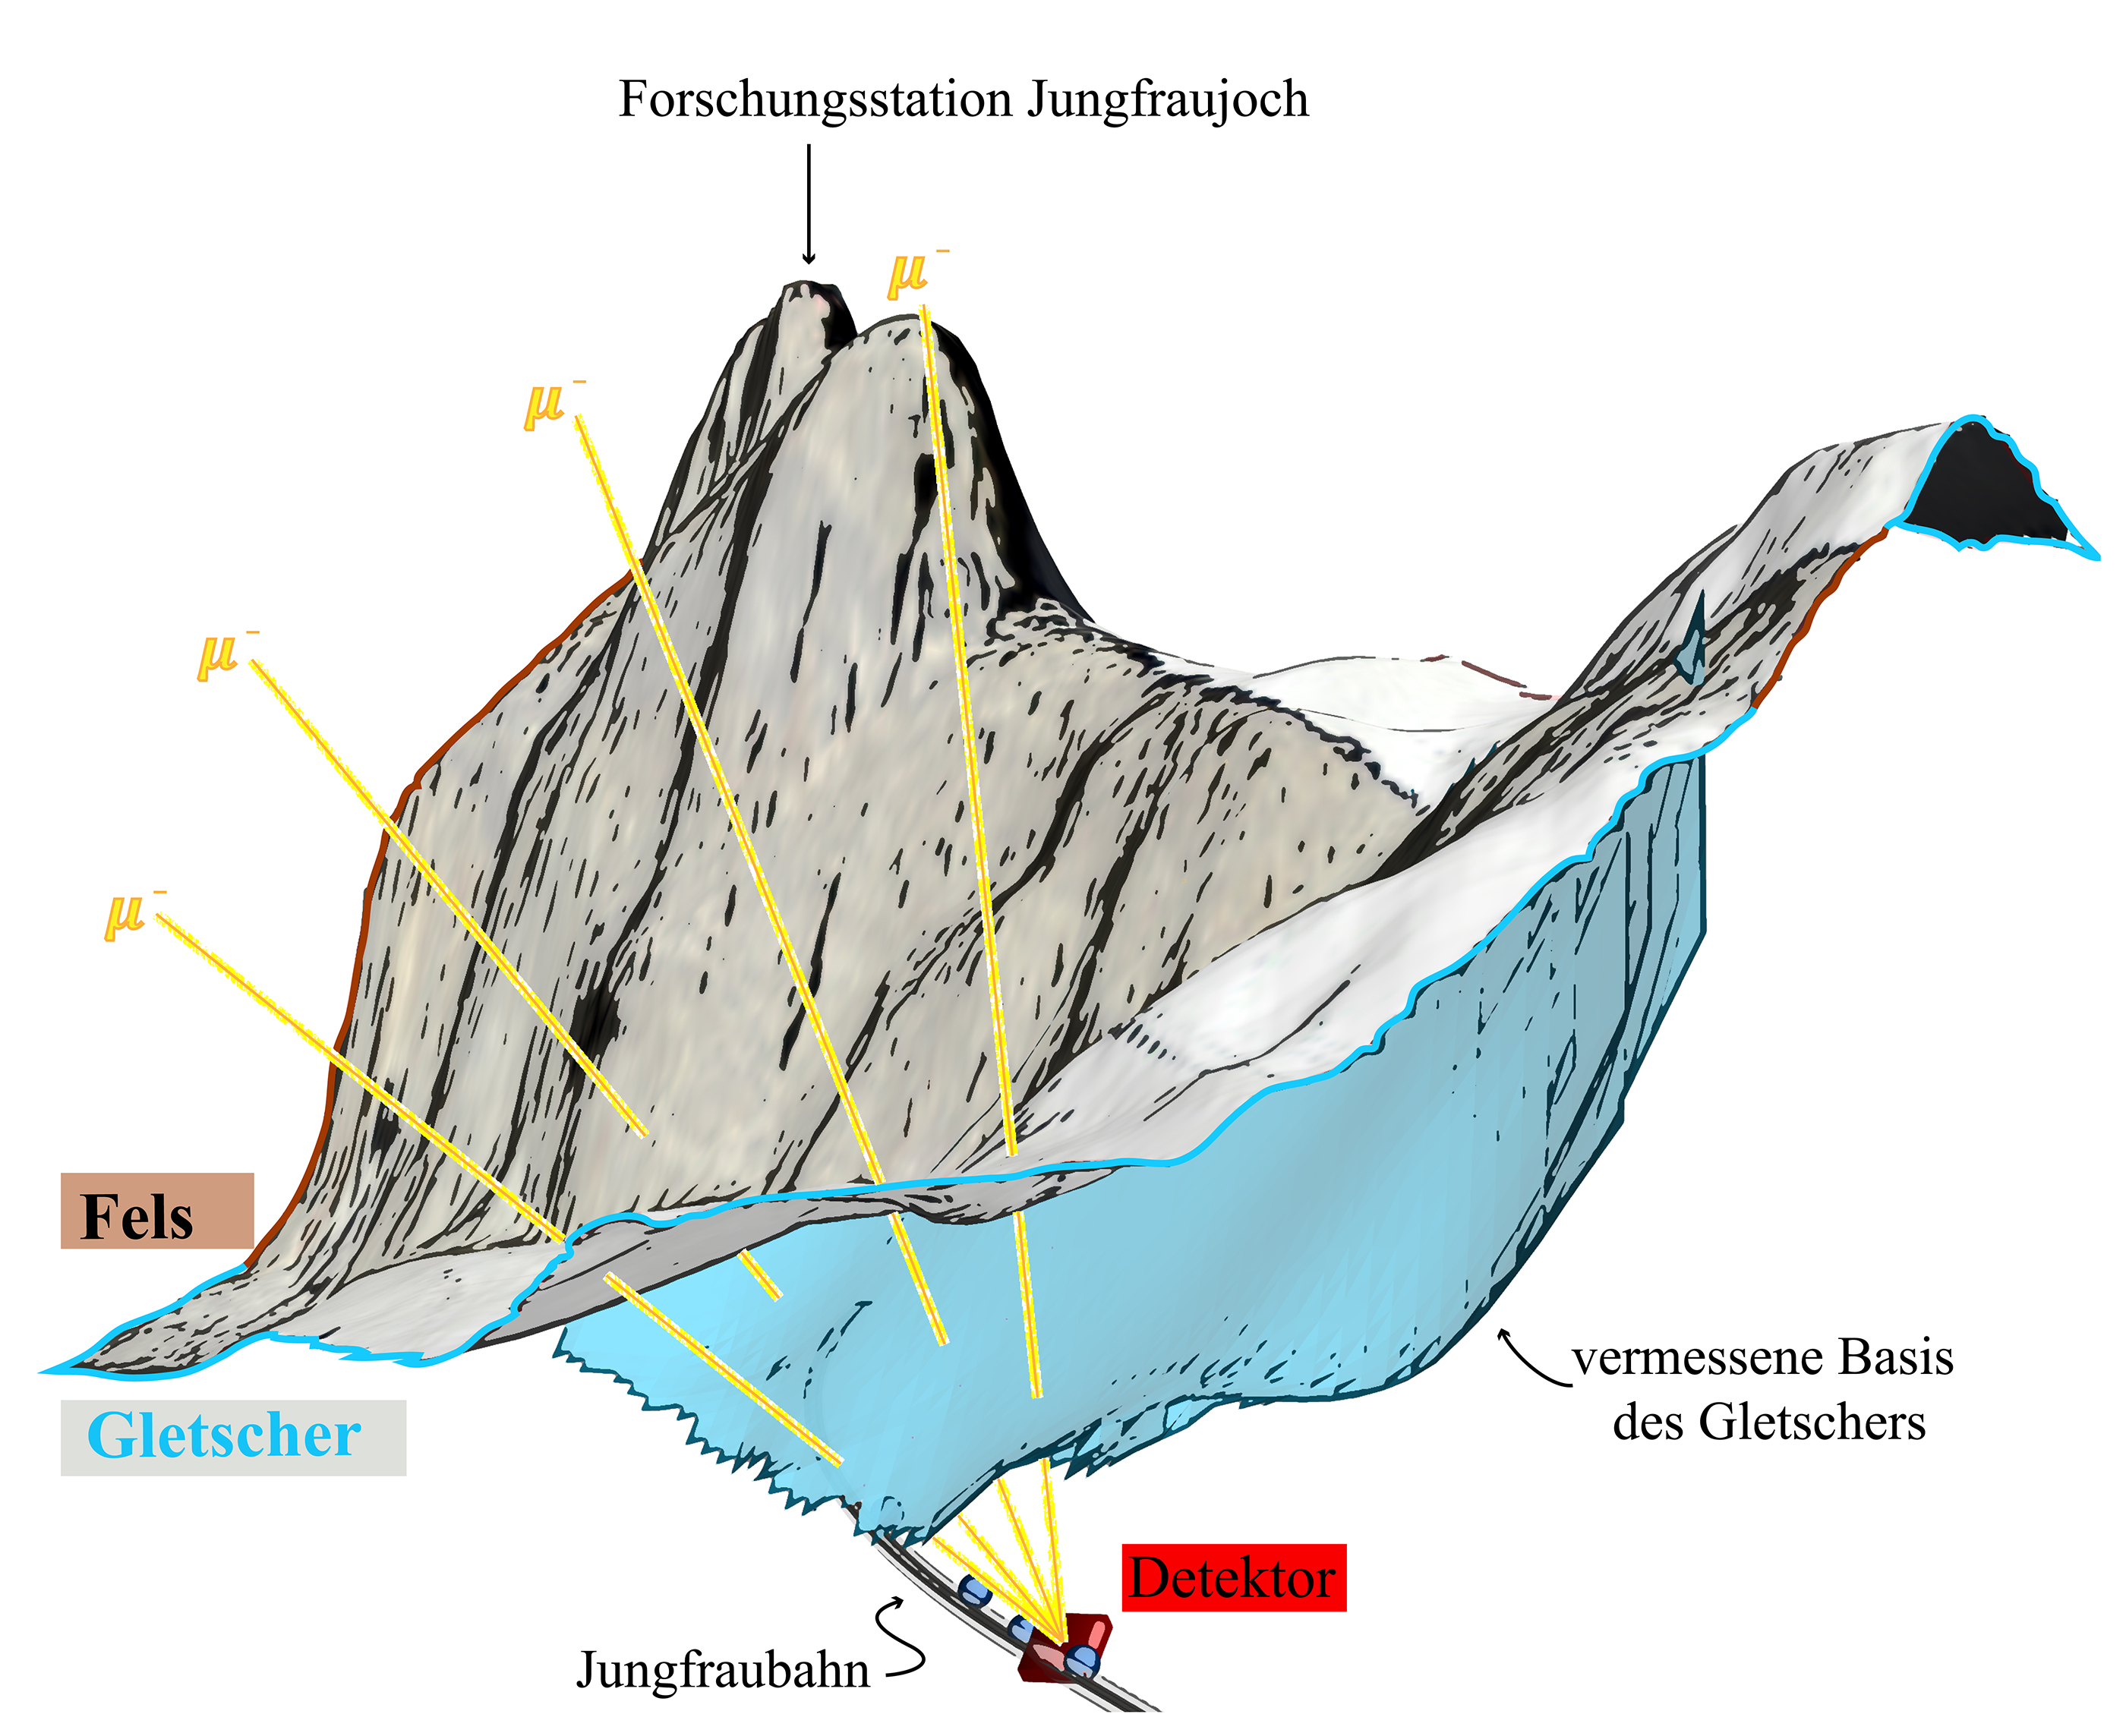 Figure showing how muon tomography is set up at Jungfraujoch